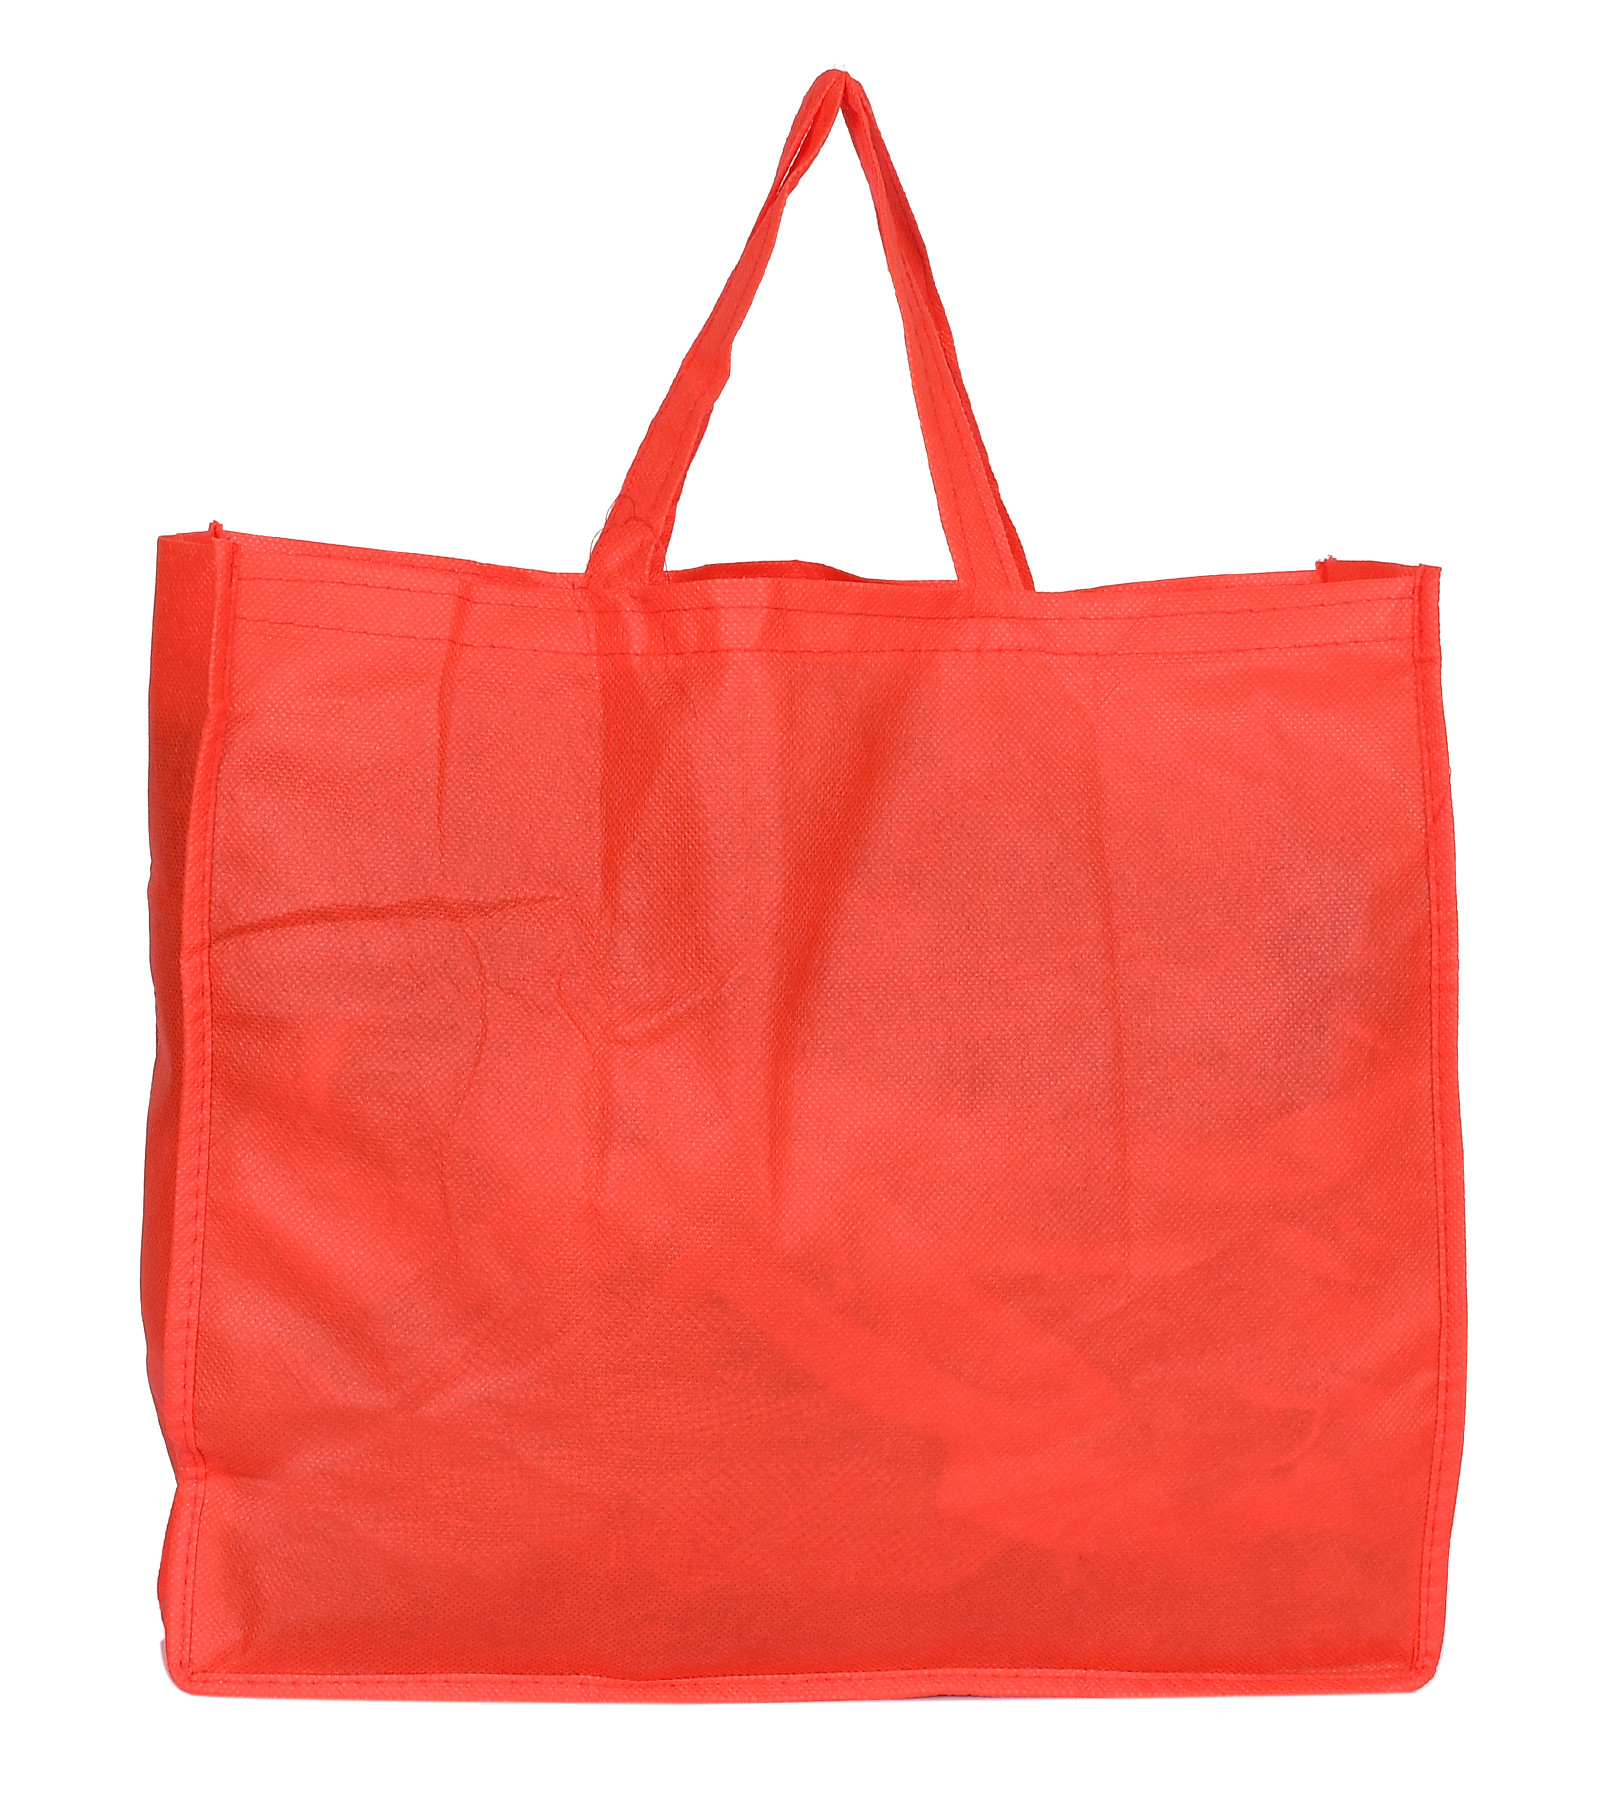 Kuber Industries Shopping Grocery Bags Foldable, Washable Grocery Tote Bag with One Small Pocket, Eco-Friendly Purse Bag Fits in Pocket Waterproof & Lightweight (Orange & Red)